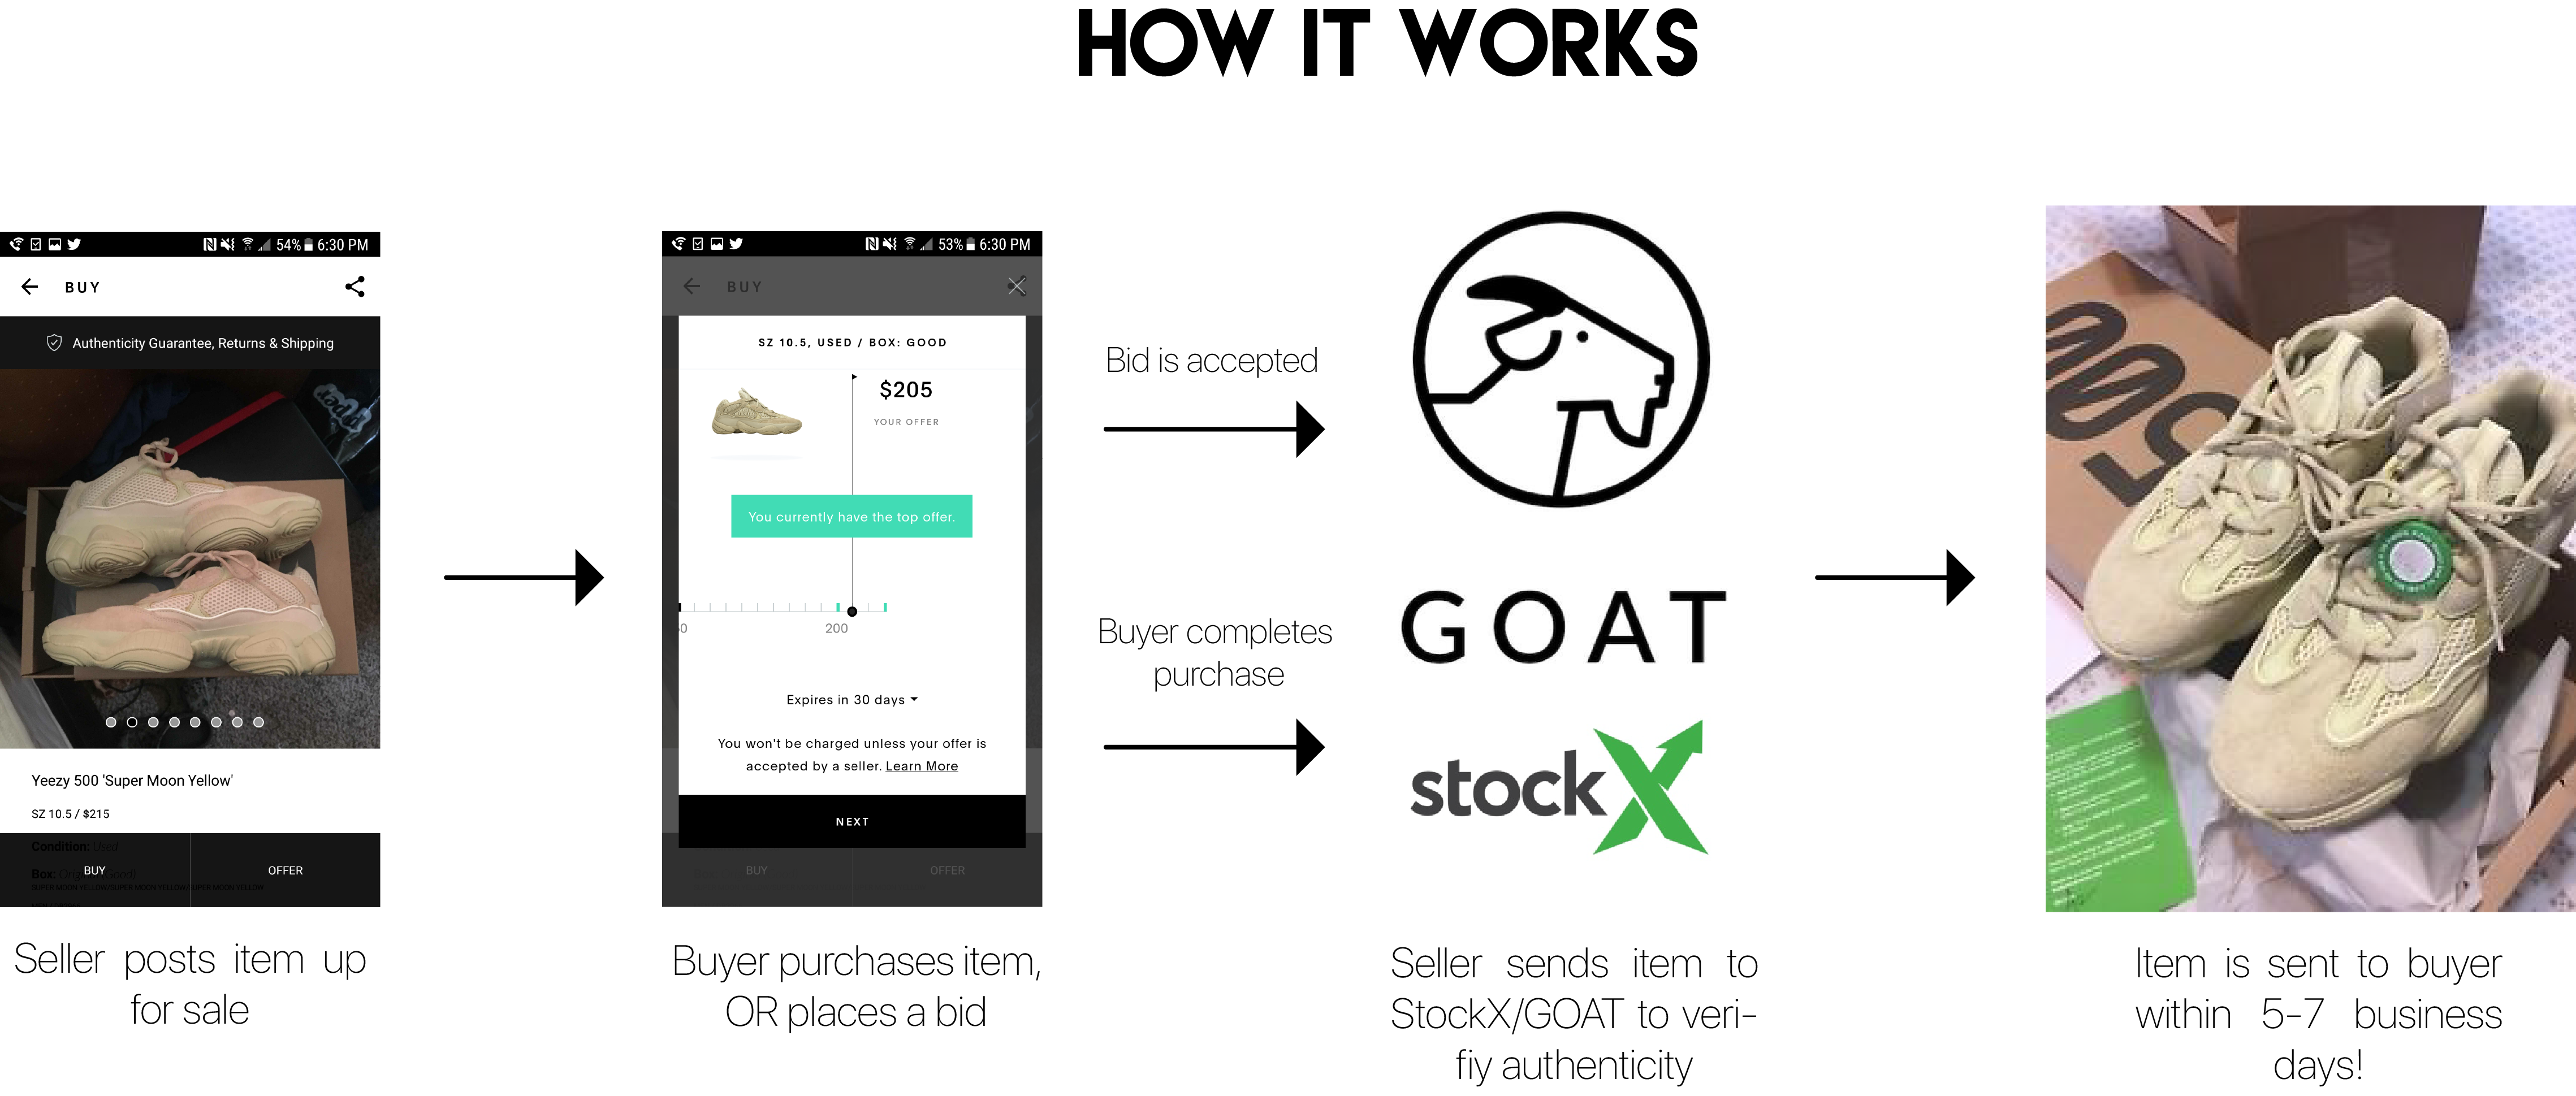 goat or stockx